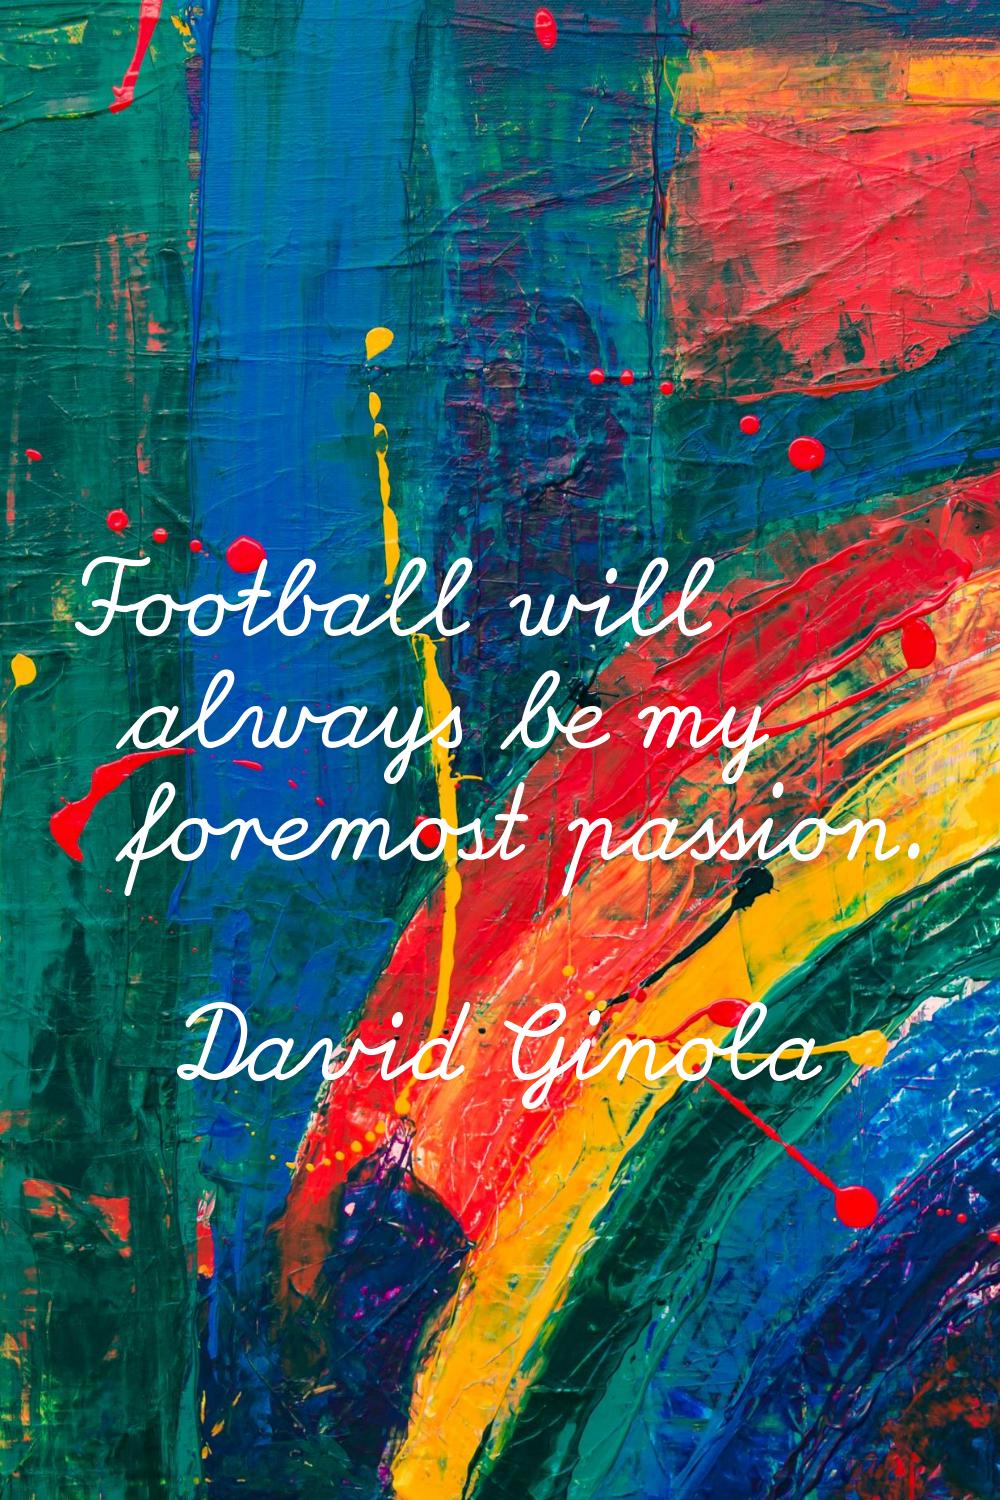 Football will always be my foremost passion.